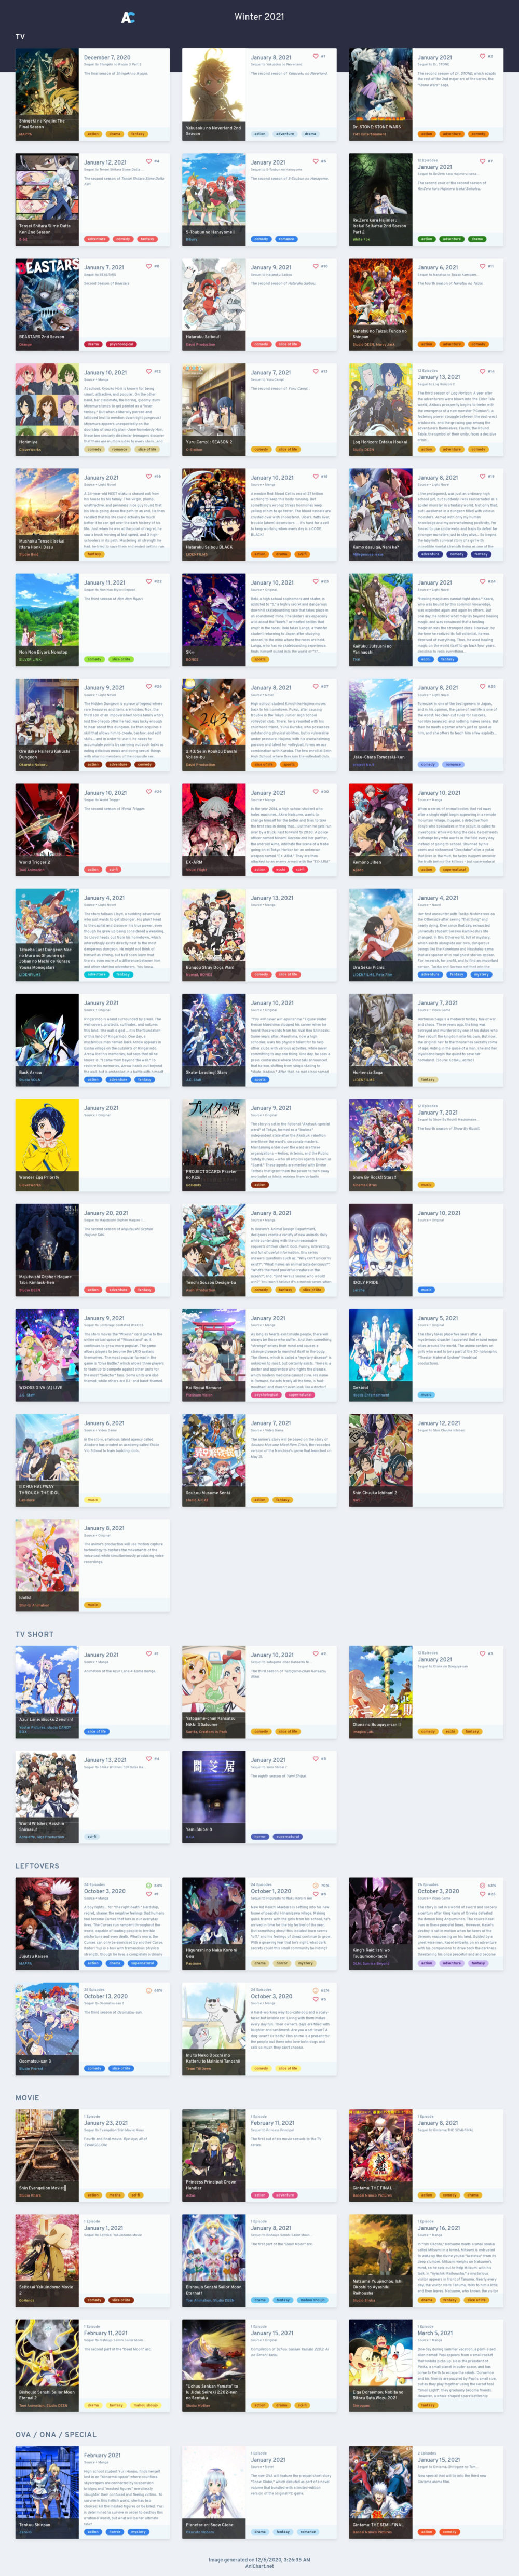 Recommendations by Genre | Anime reccomendations, Anime chart, Anime  recommendations